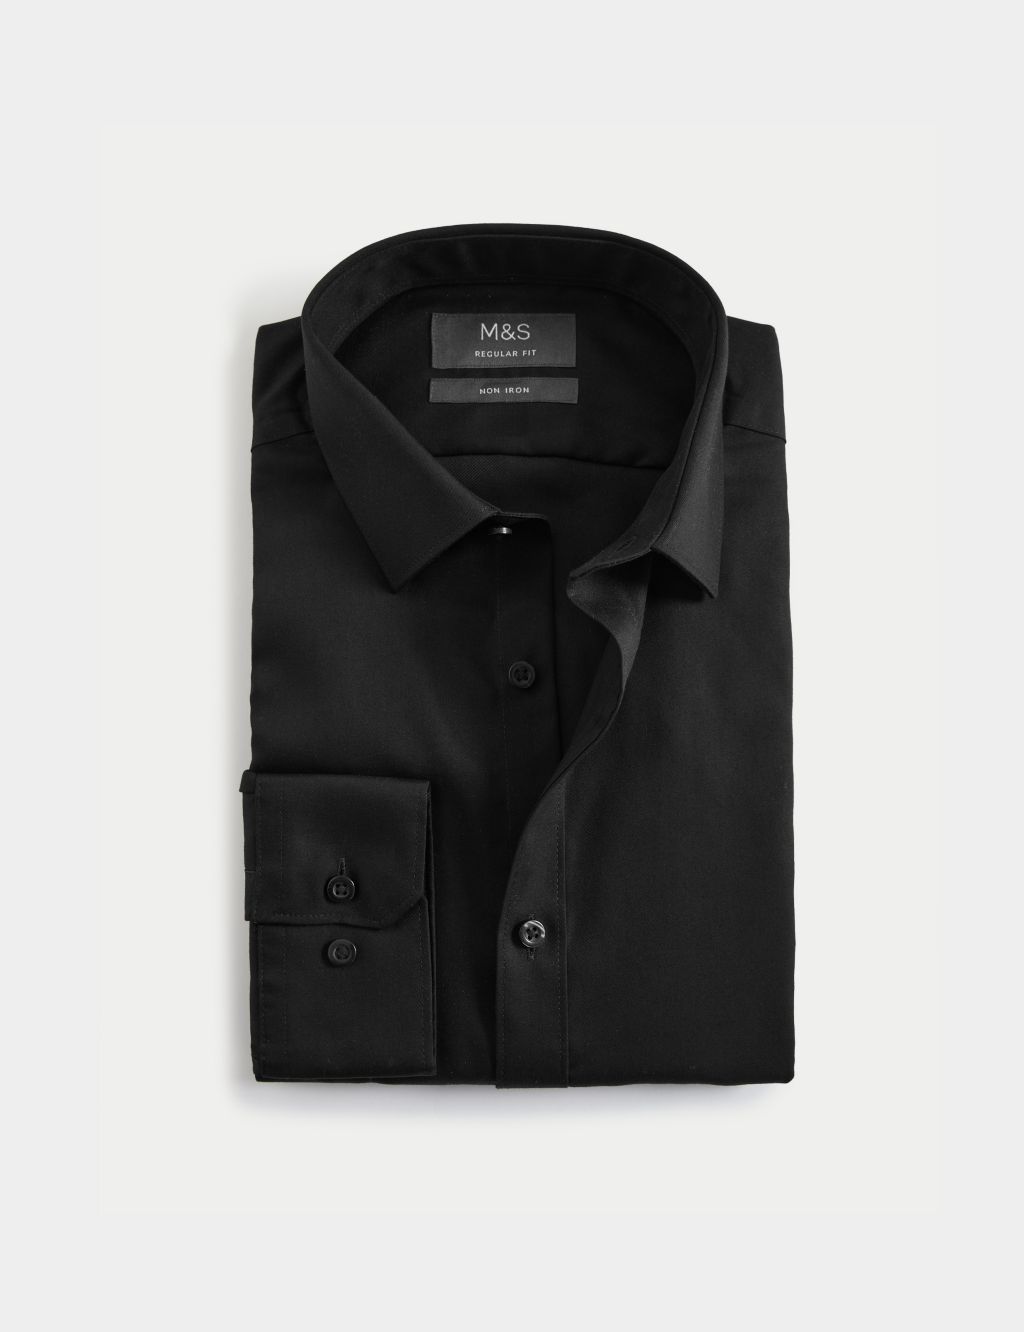 Gucci Solid Black Dress Shirt Size 42 / 16,5 U.S. Fitted